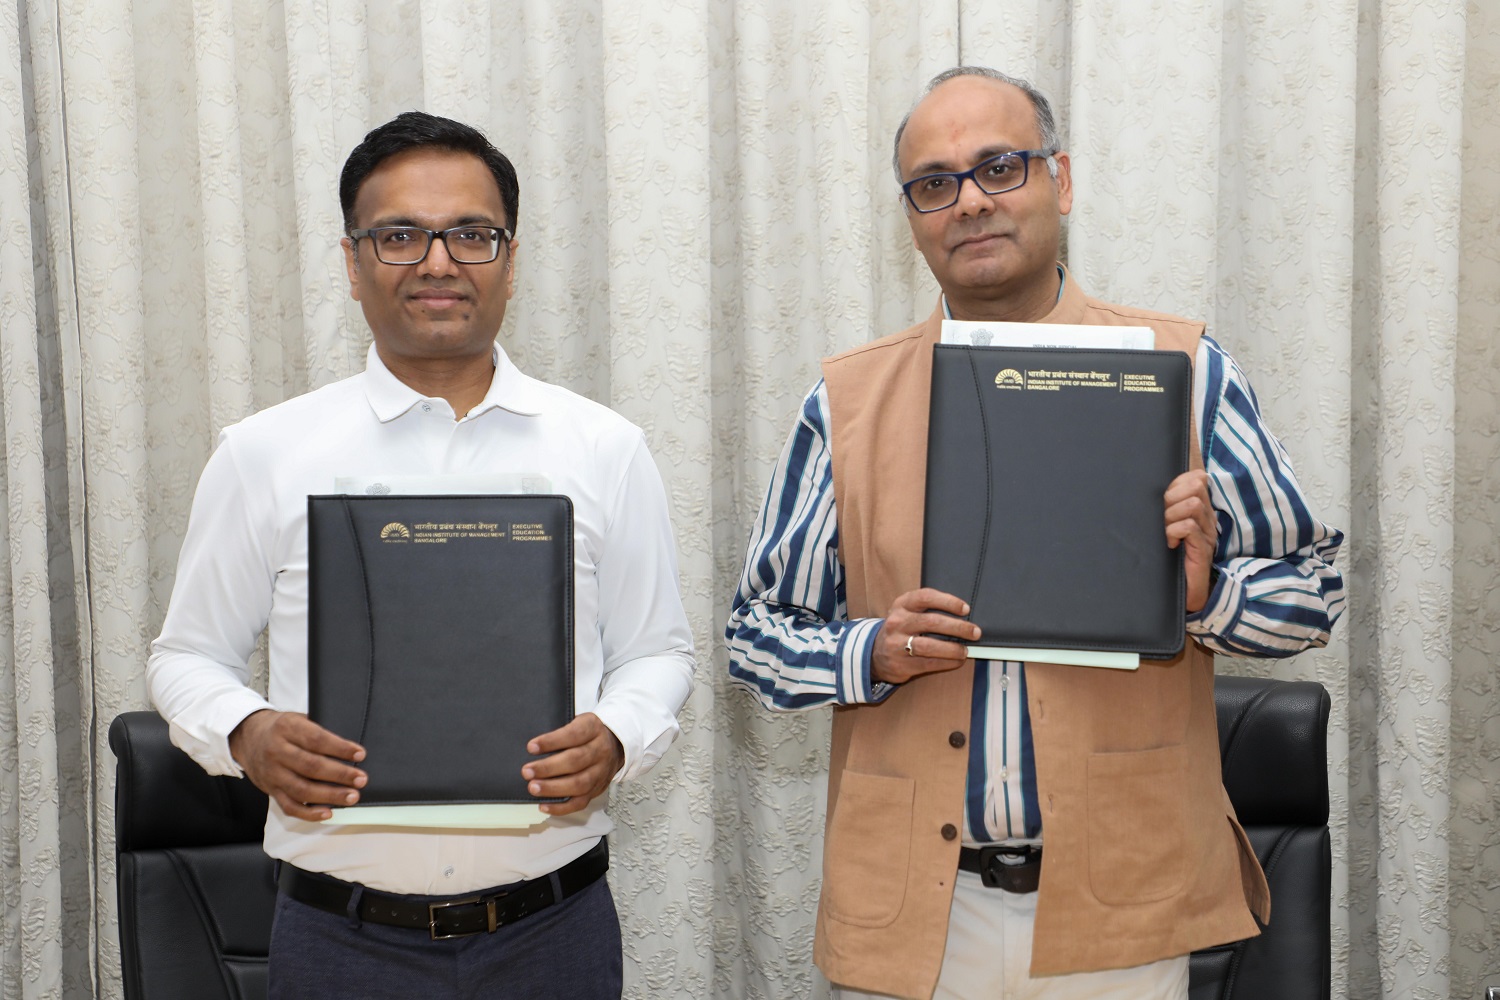 Mr. Uday Prakash, VP, Finance & Operations, Herbalife India, and Prof. Chetan Subramanian, Dean Faculty, IIMB, with the signed agreement.